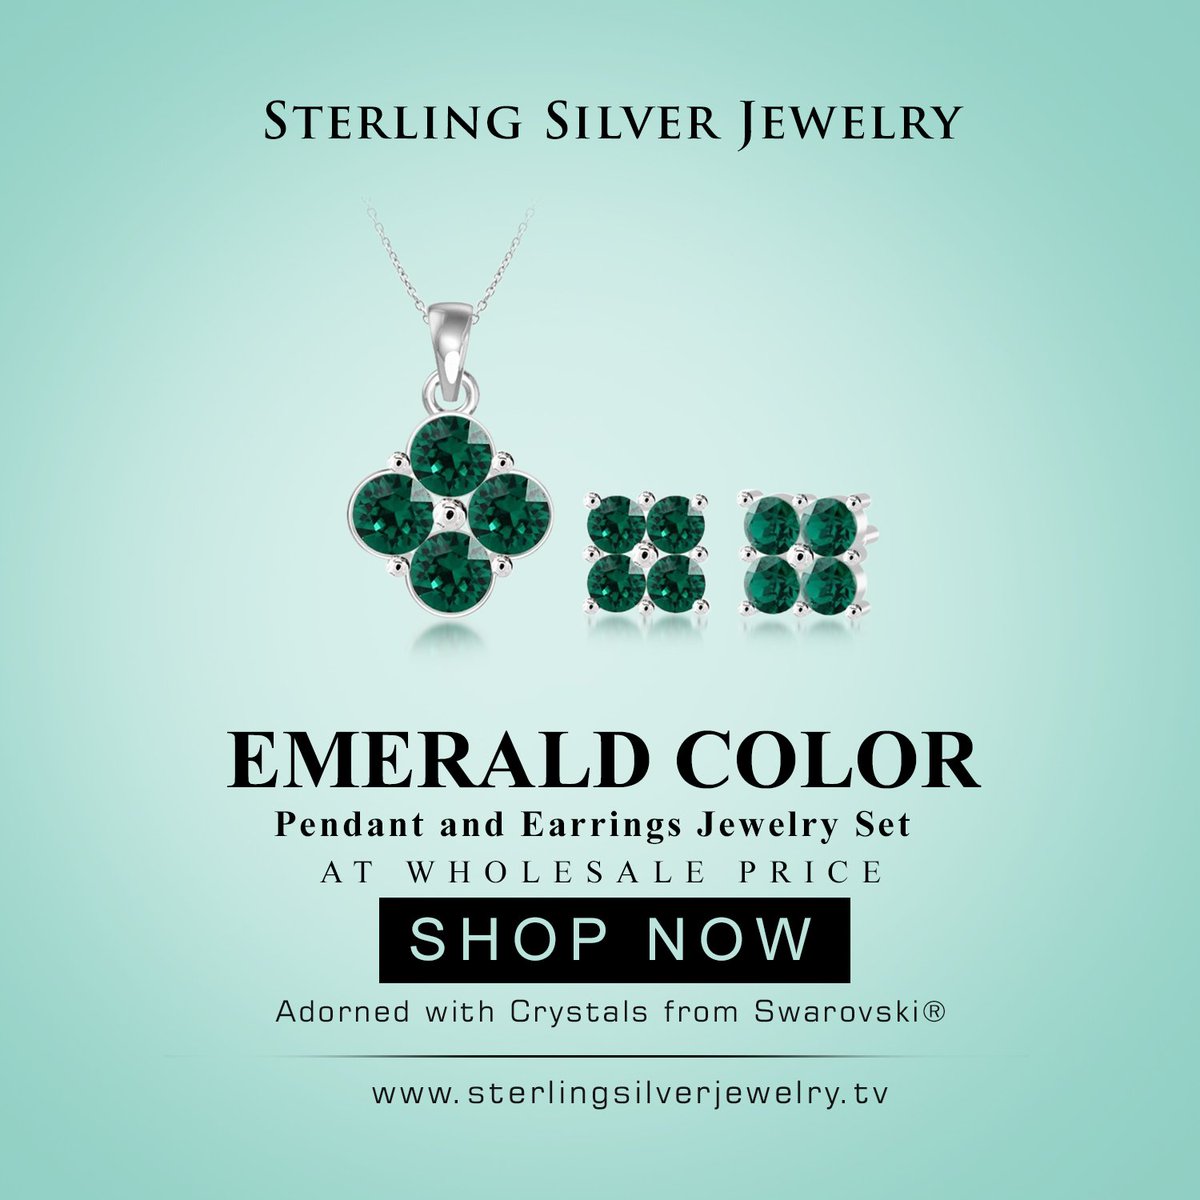 #Emerald Color #Pendant and #Earrings #JewelrySet with #Crystals from #Swarovski® Online at Best #Wholesale Price. More Here: bit.ly/2VVRTKK #glamour #Swarovskijewelry #FollowTheSparkle #swarovskijewelry #swarovskicrystals #crystalsfromswarovski #jewels #customjewelry